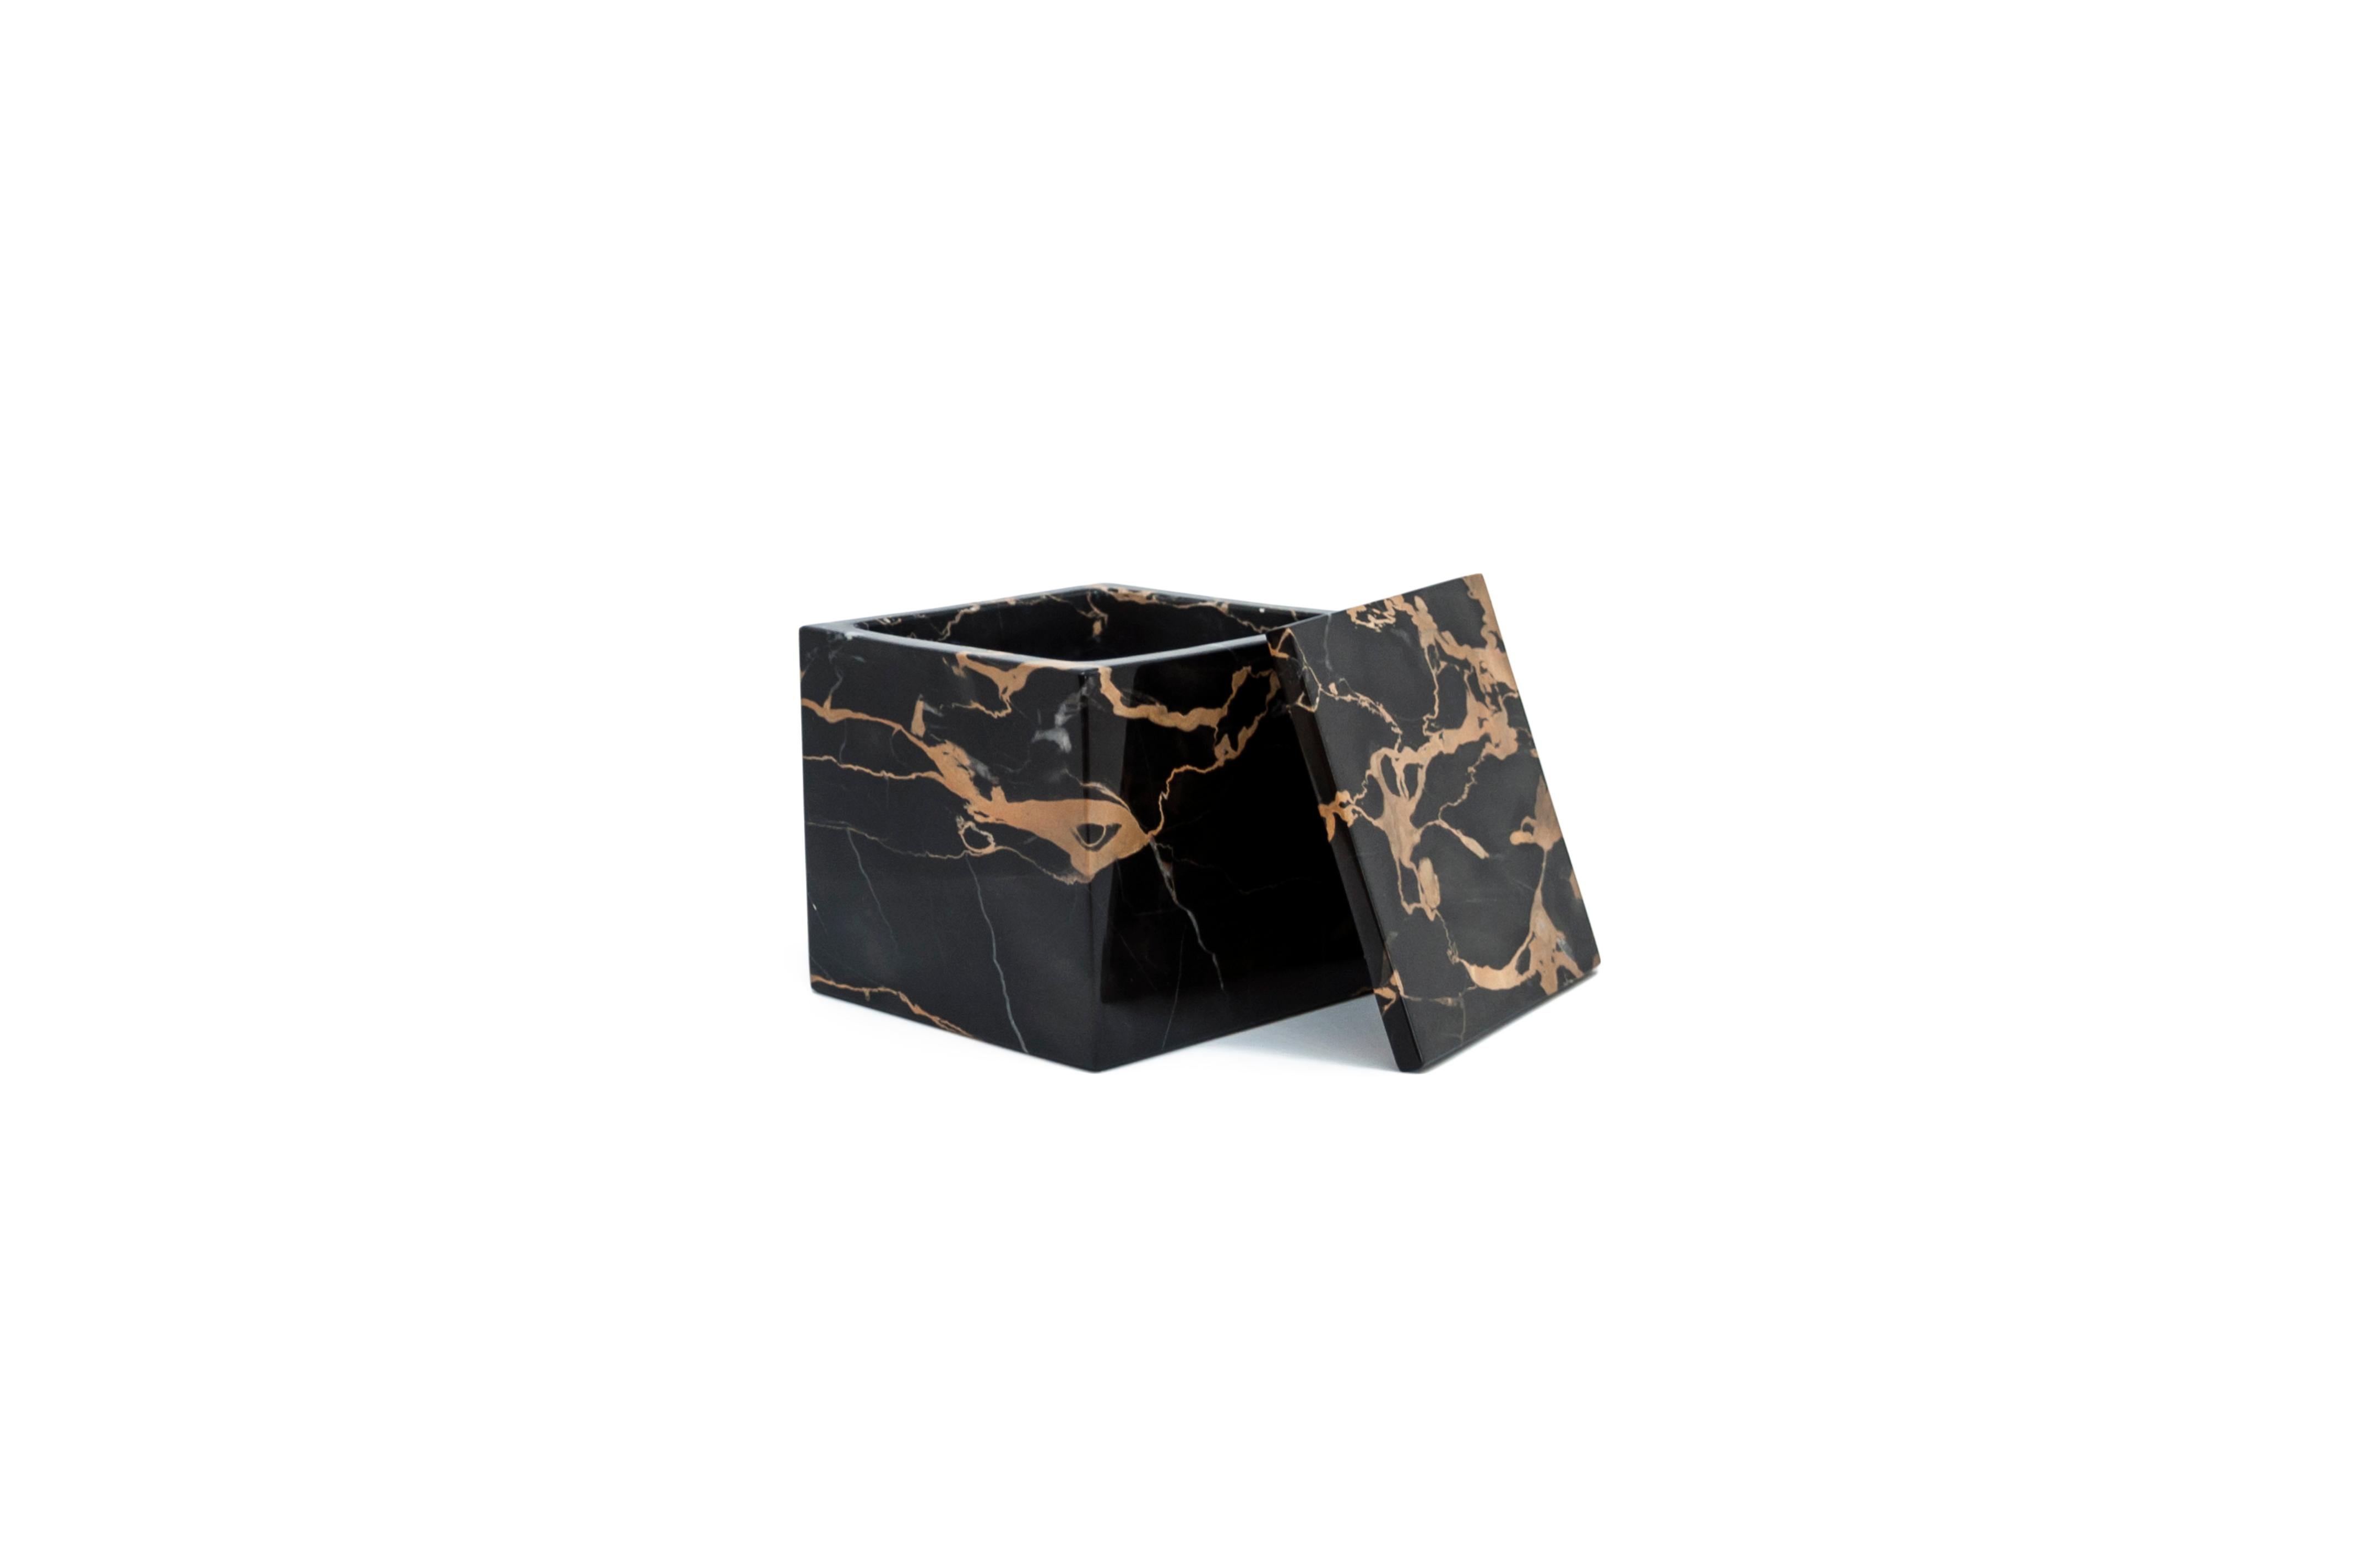 A luxury squared box holder in the rare and beautiful Portoro marble characterised by black color base and golden natural veins. Box holder size 9,5 x 9,5 x 9,5 cm.
Each piece is unique (since each marble block is different in veins and shades) and